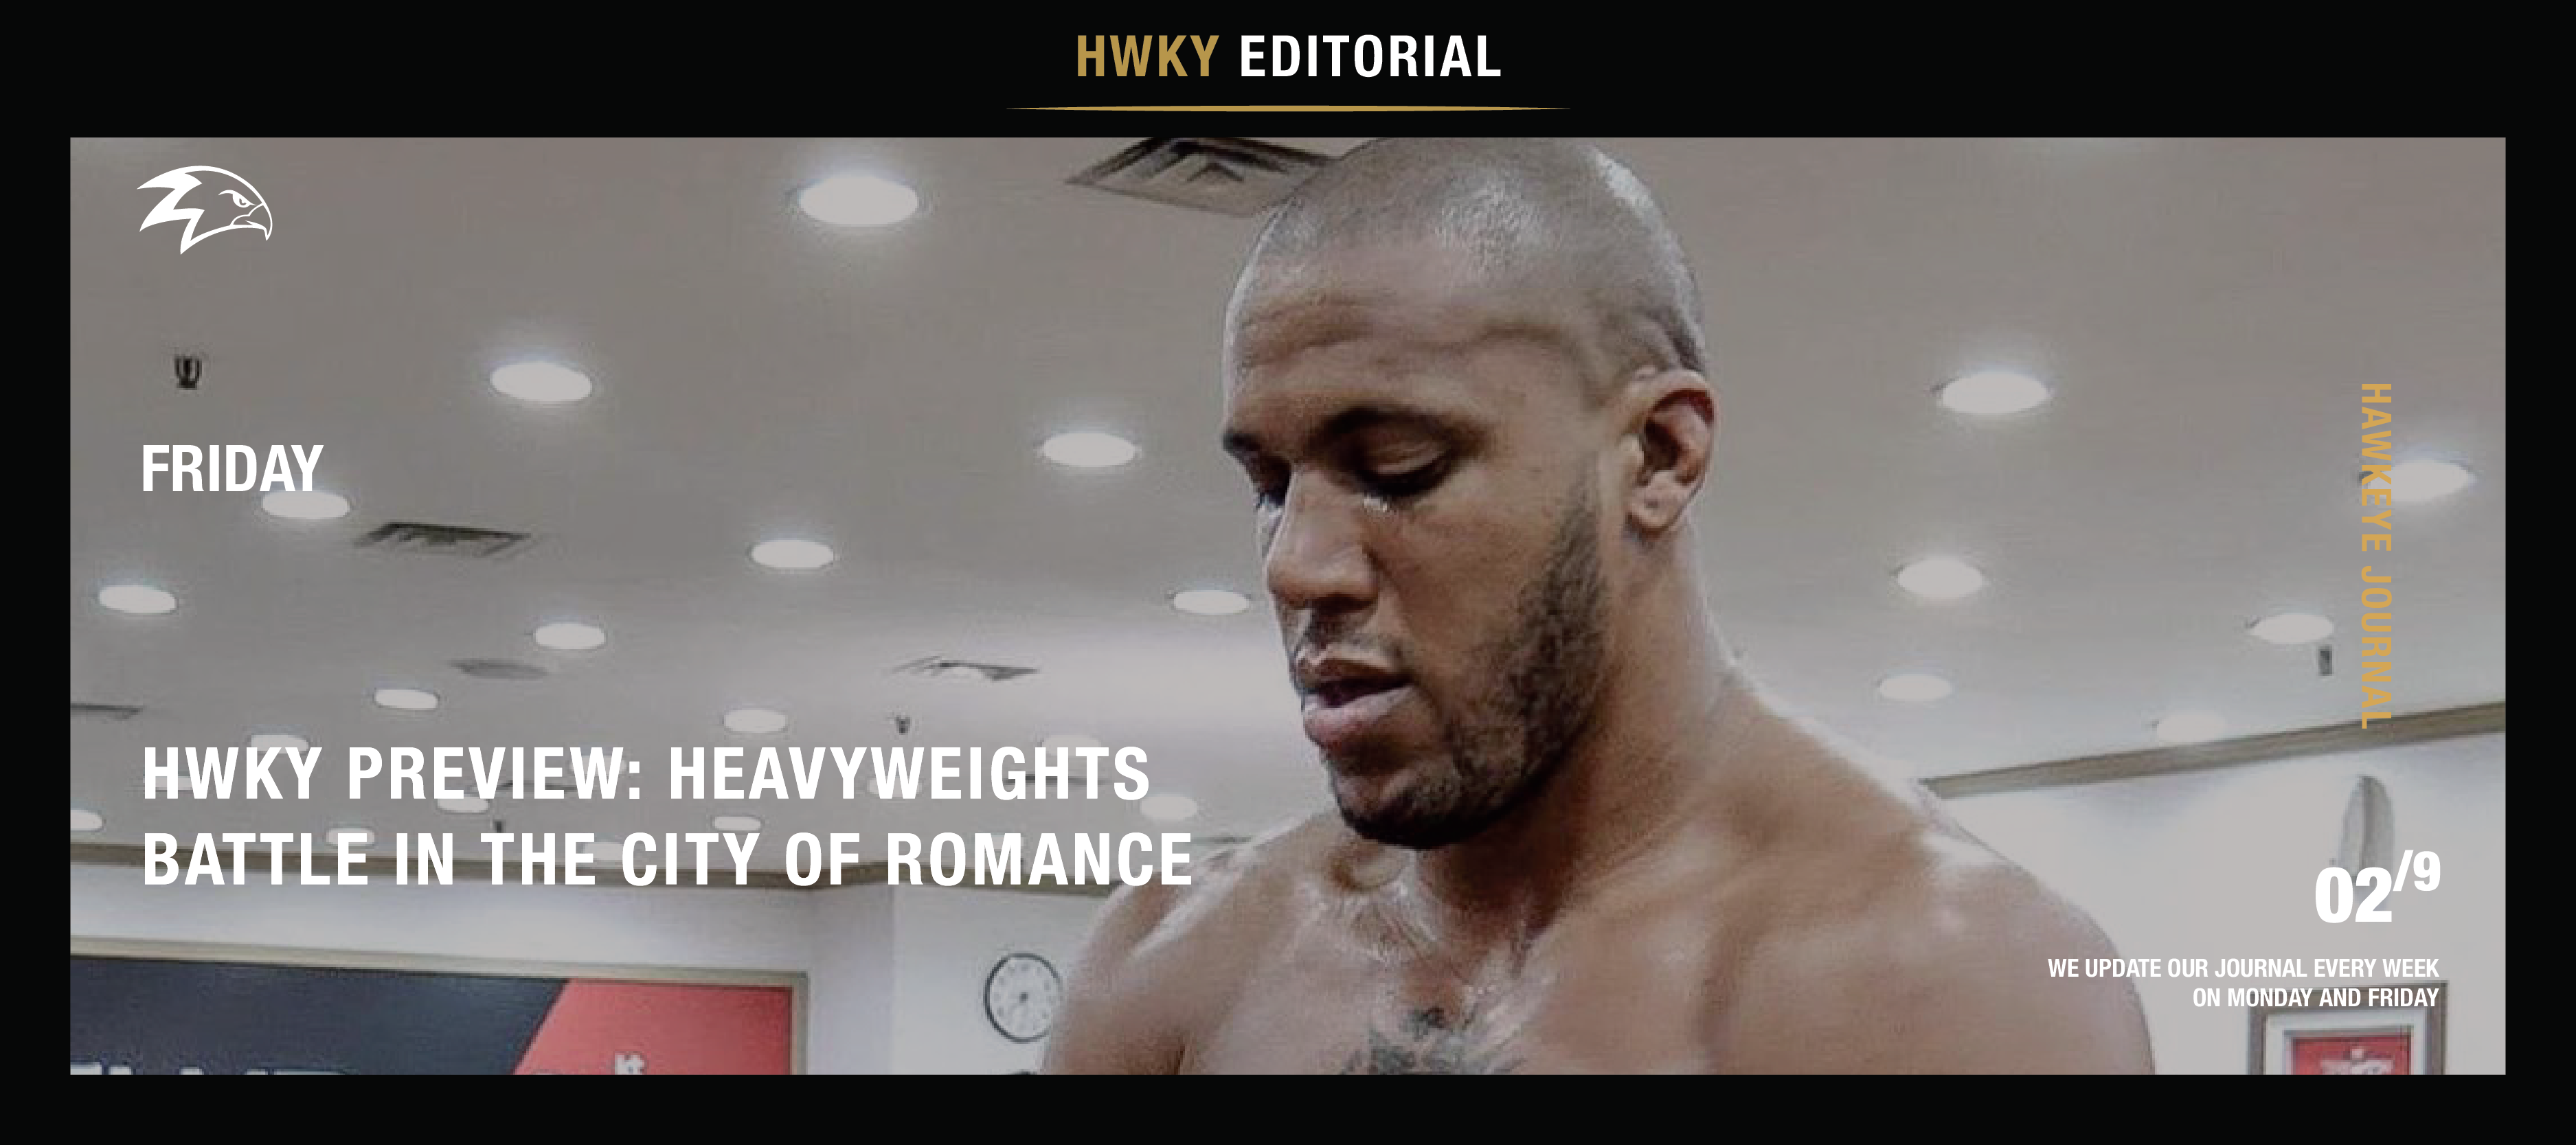 HWKY Preview: Heavyweights Battle In The City Of Romance